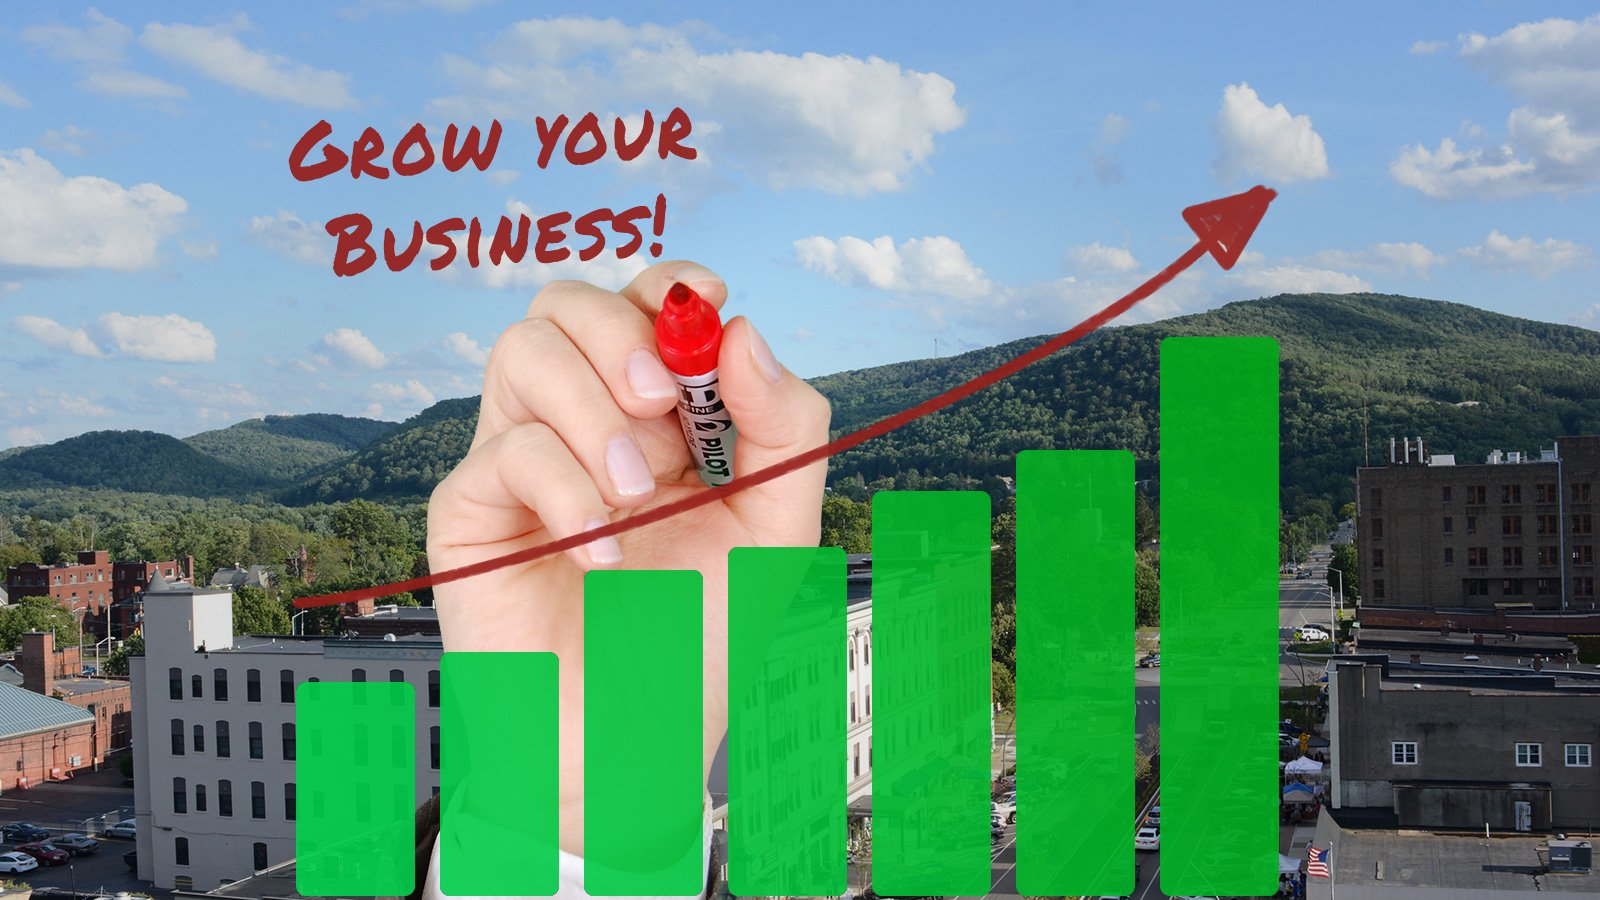 Grow your business!